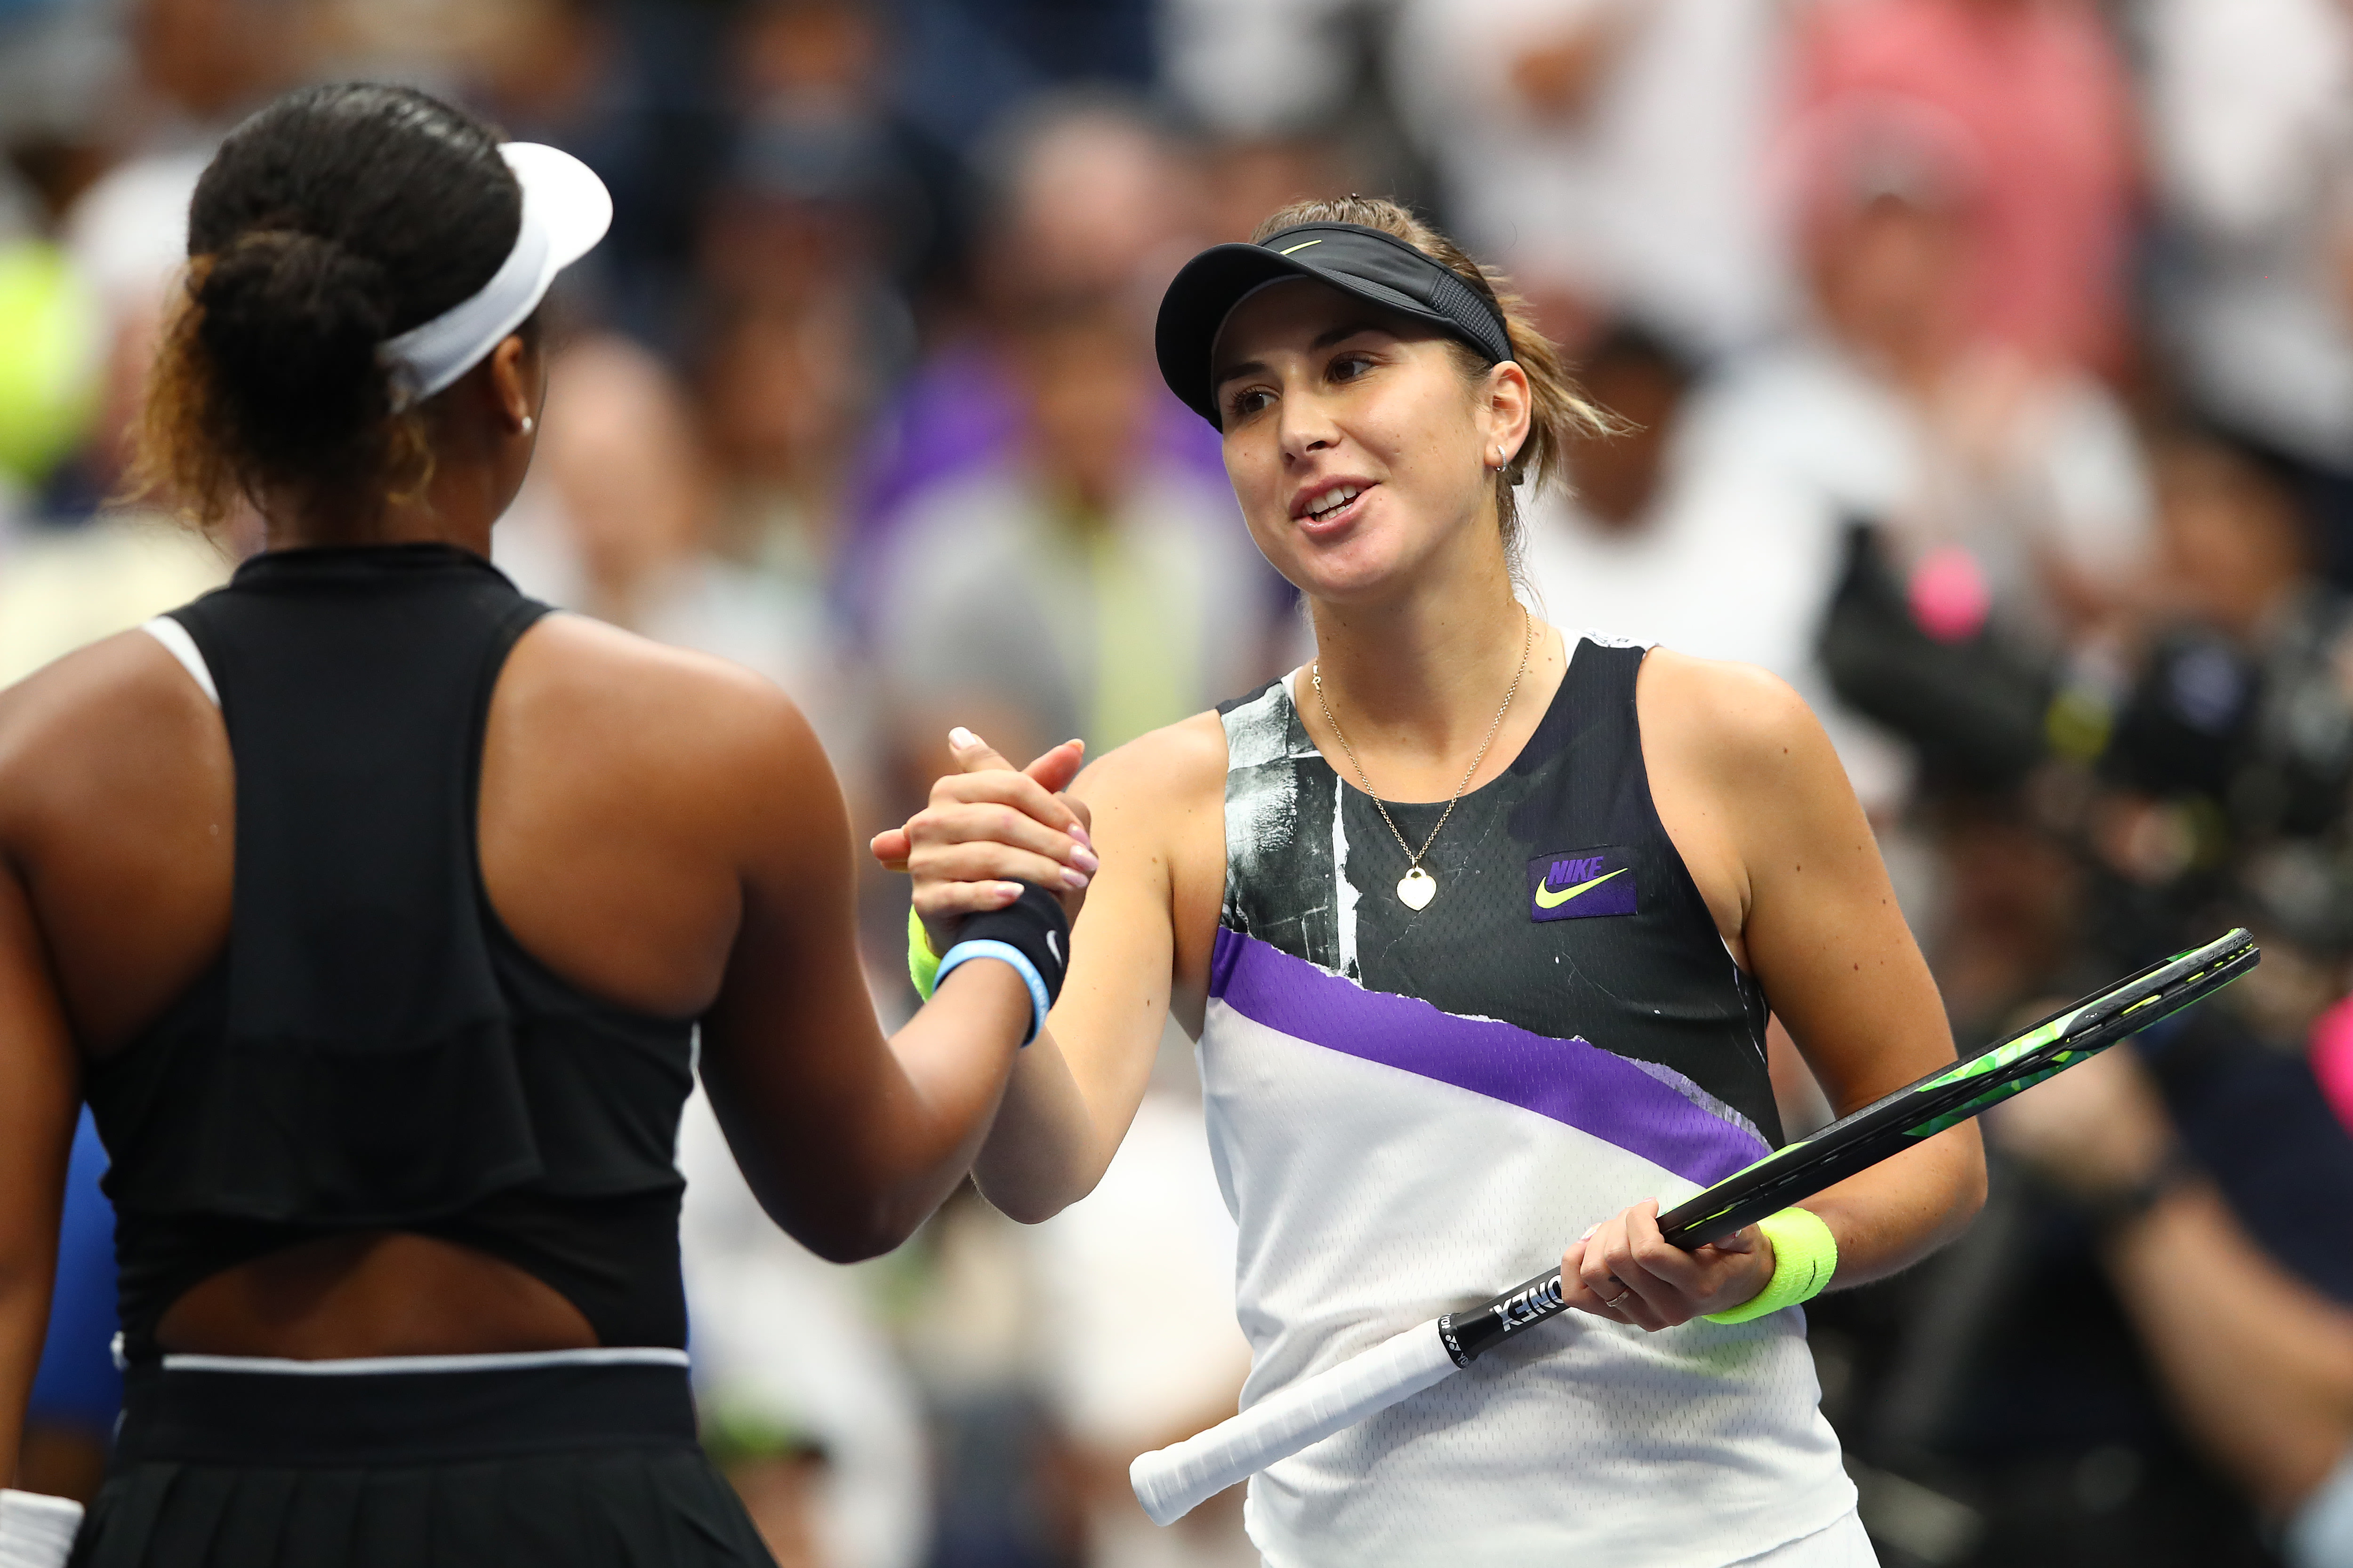 large peaceful have confidence Bencic, 22, plays like the seasoned veteran she is in upset of Osaka